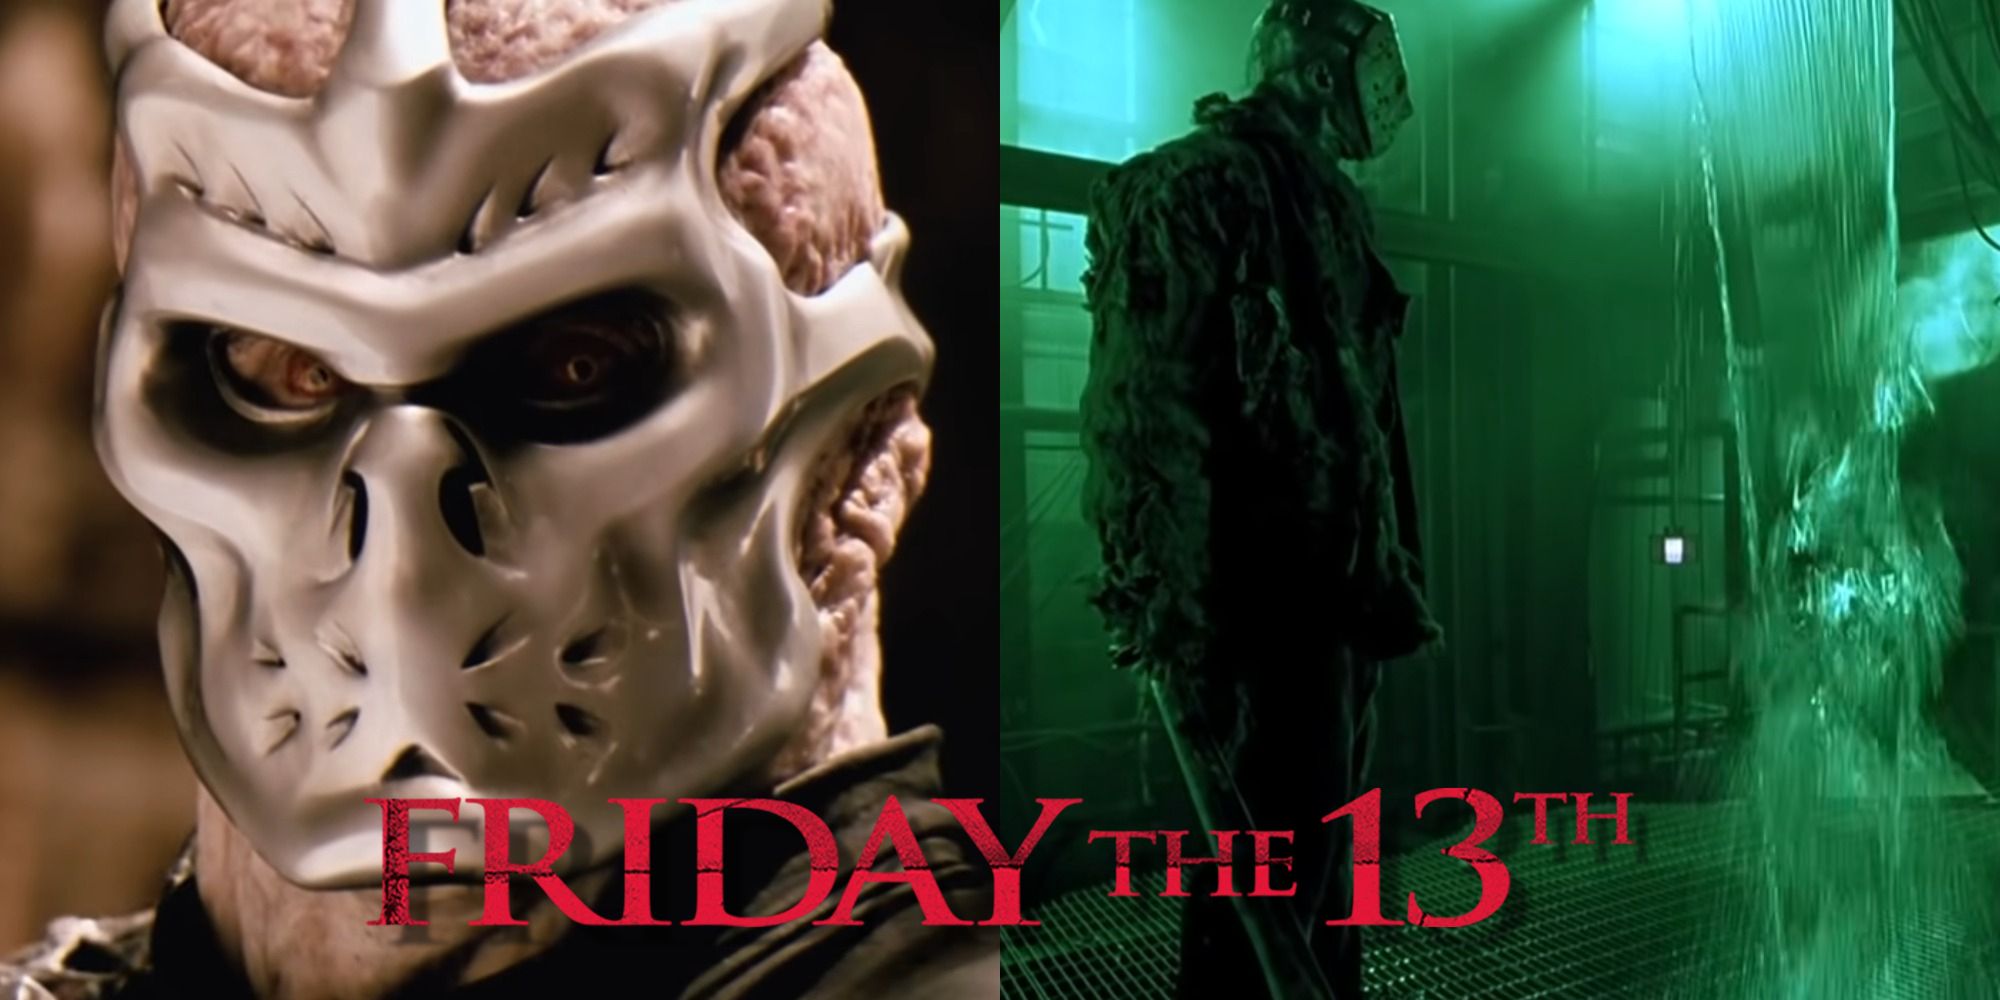 Split image of Uber Jason from Jason X and Jason Voorhees afraid of water in Freddy VS Jason